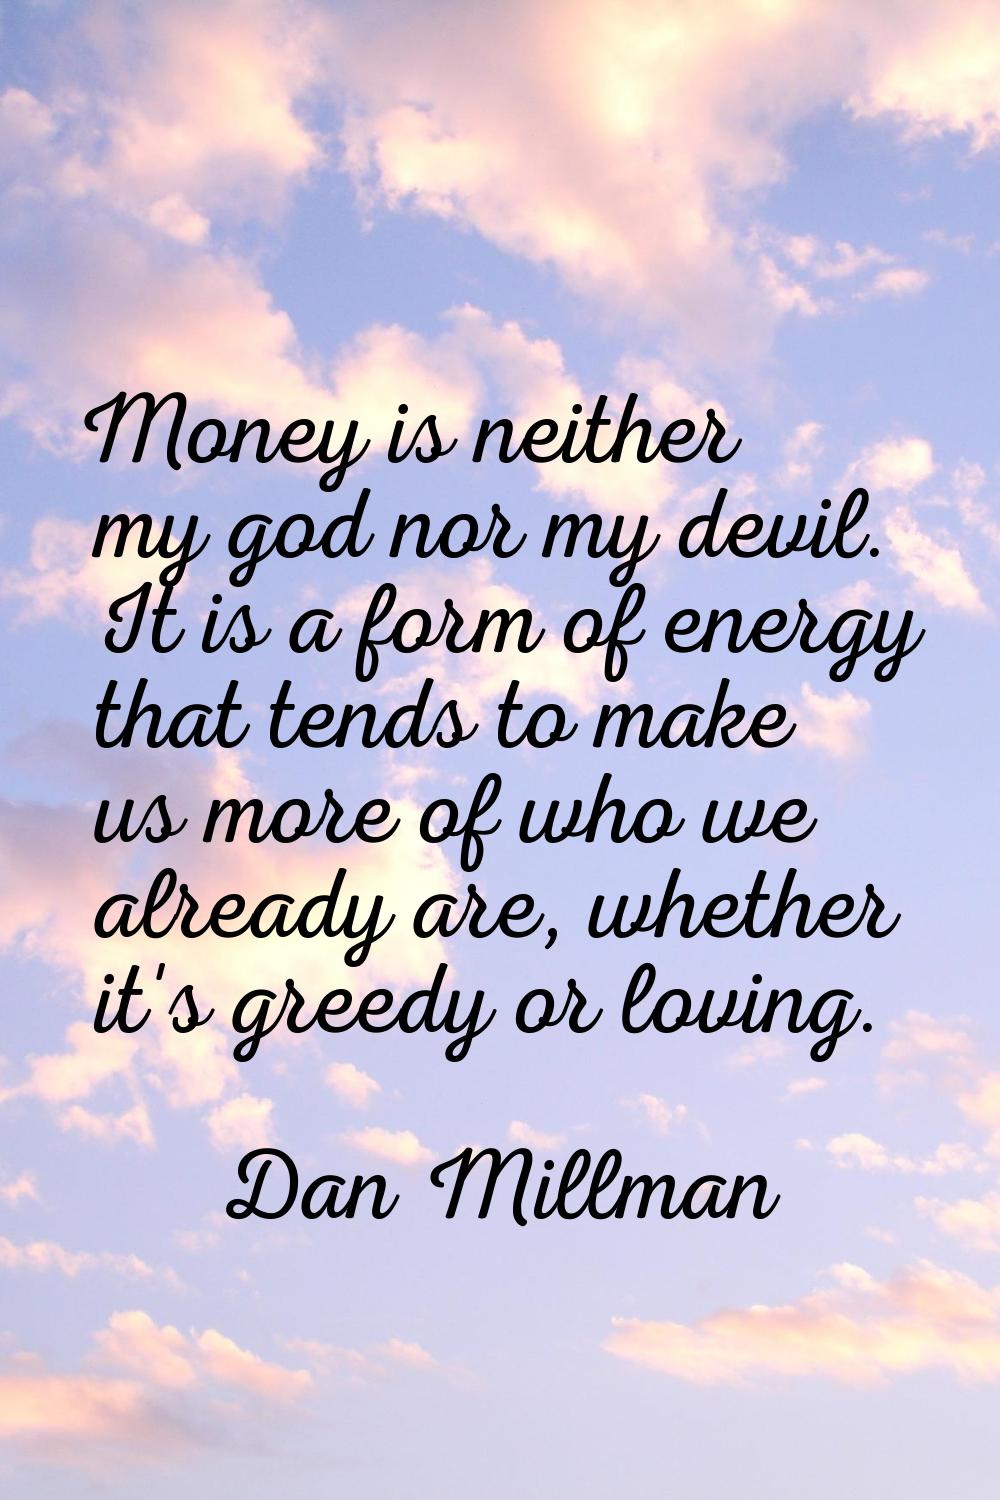 Money is neither my god nor my devil. It is a form of energy that tends to make us more of who we a